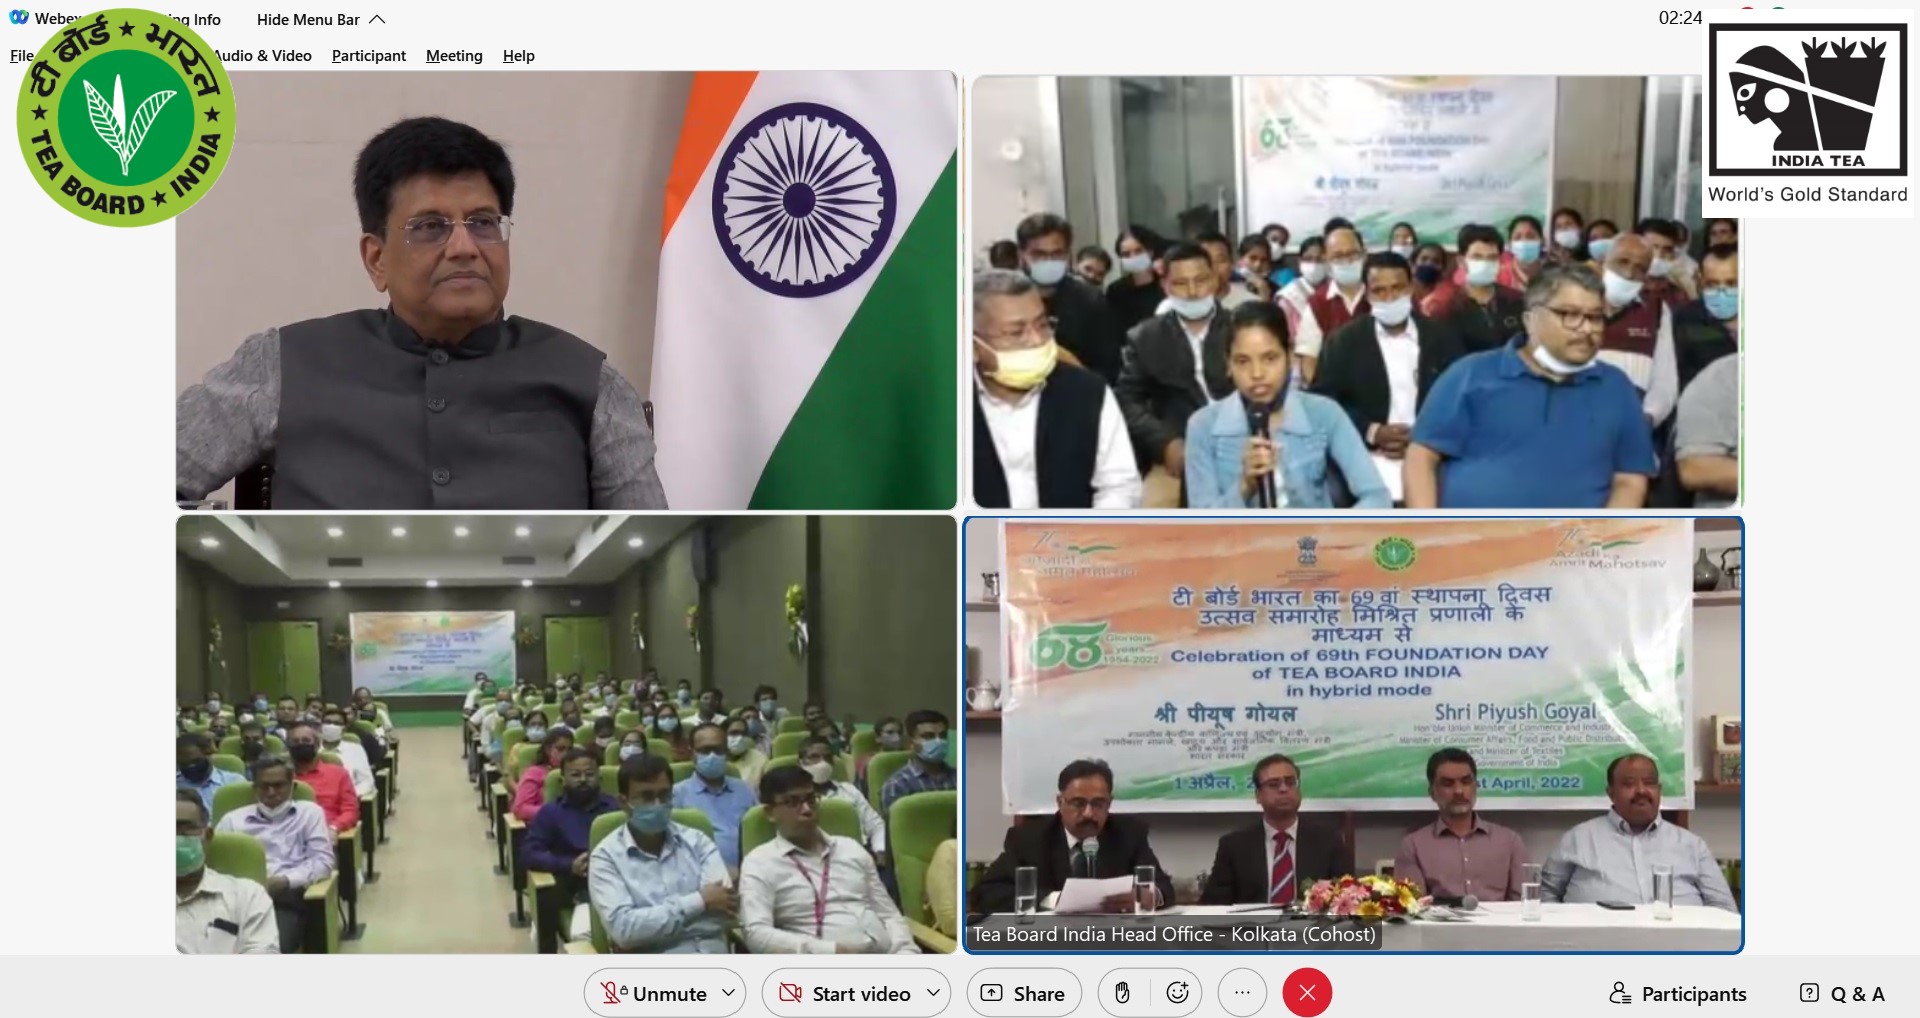 Shri Piyush Goyal, Hon'ble Minister of Commerce & Industry, Minister of Consumer Affairs, Food & Public Distribution and Minister of Textiles, Govt. of India addressing the stakeholders of the Tea Industry on the occasion of 69th Foundation Day of Tea Board India, 01/04/2022